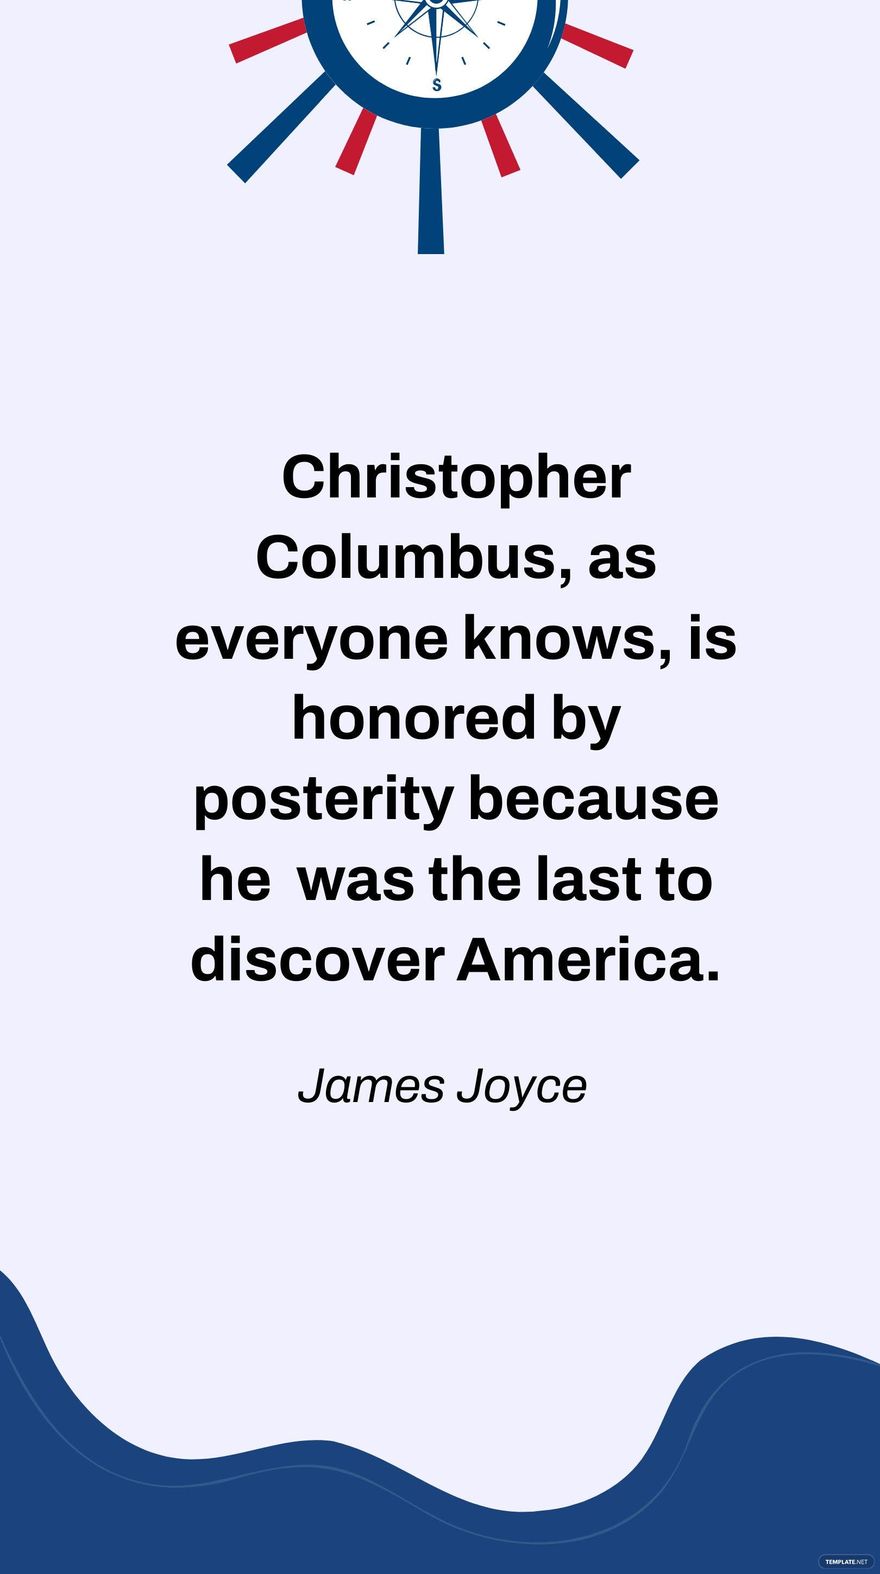 James Joyce- Christopher Columbus, as everyone knows, is honored by posterity because he was the last to discover America. in JPG